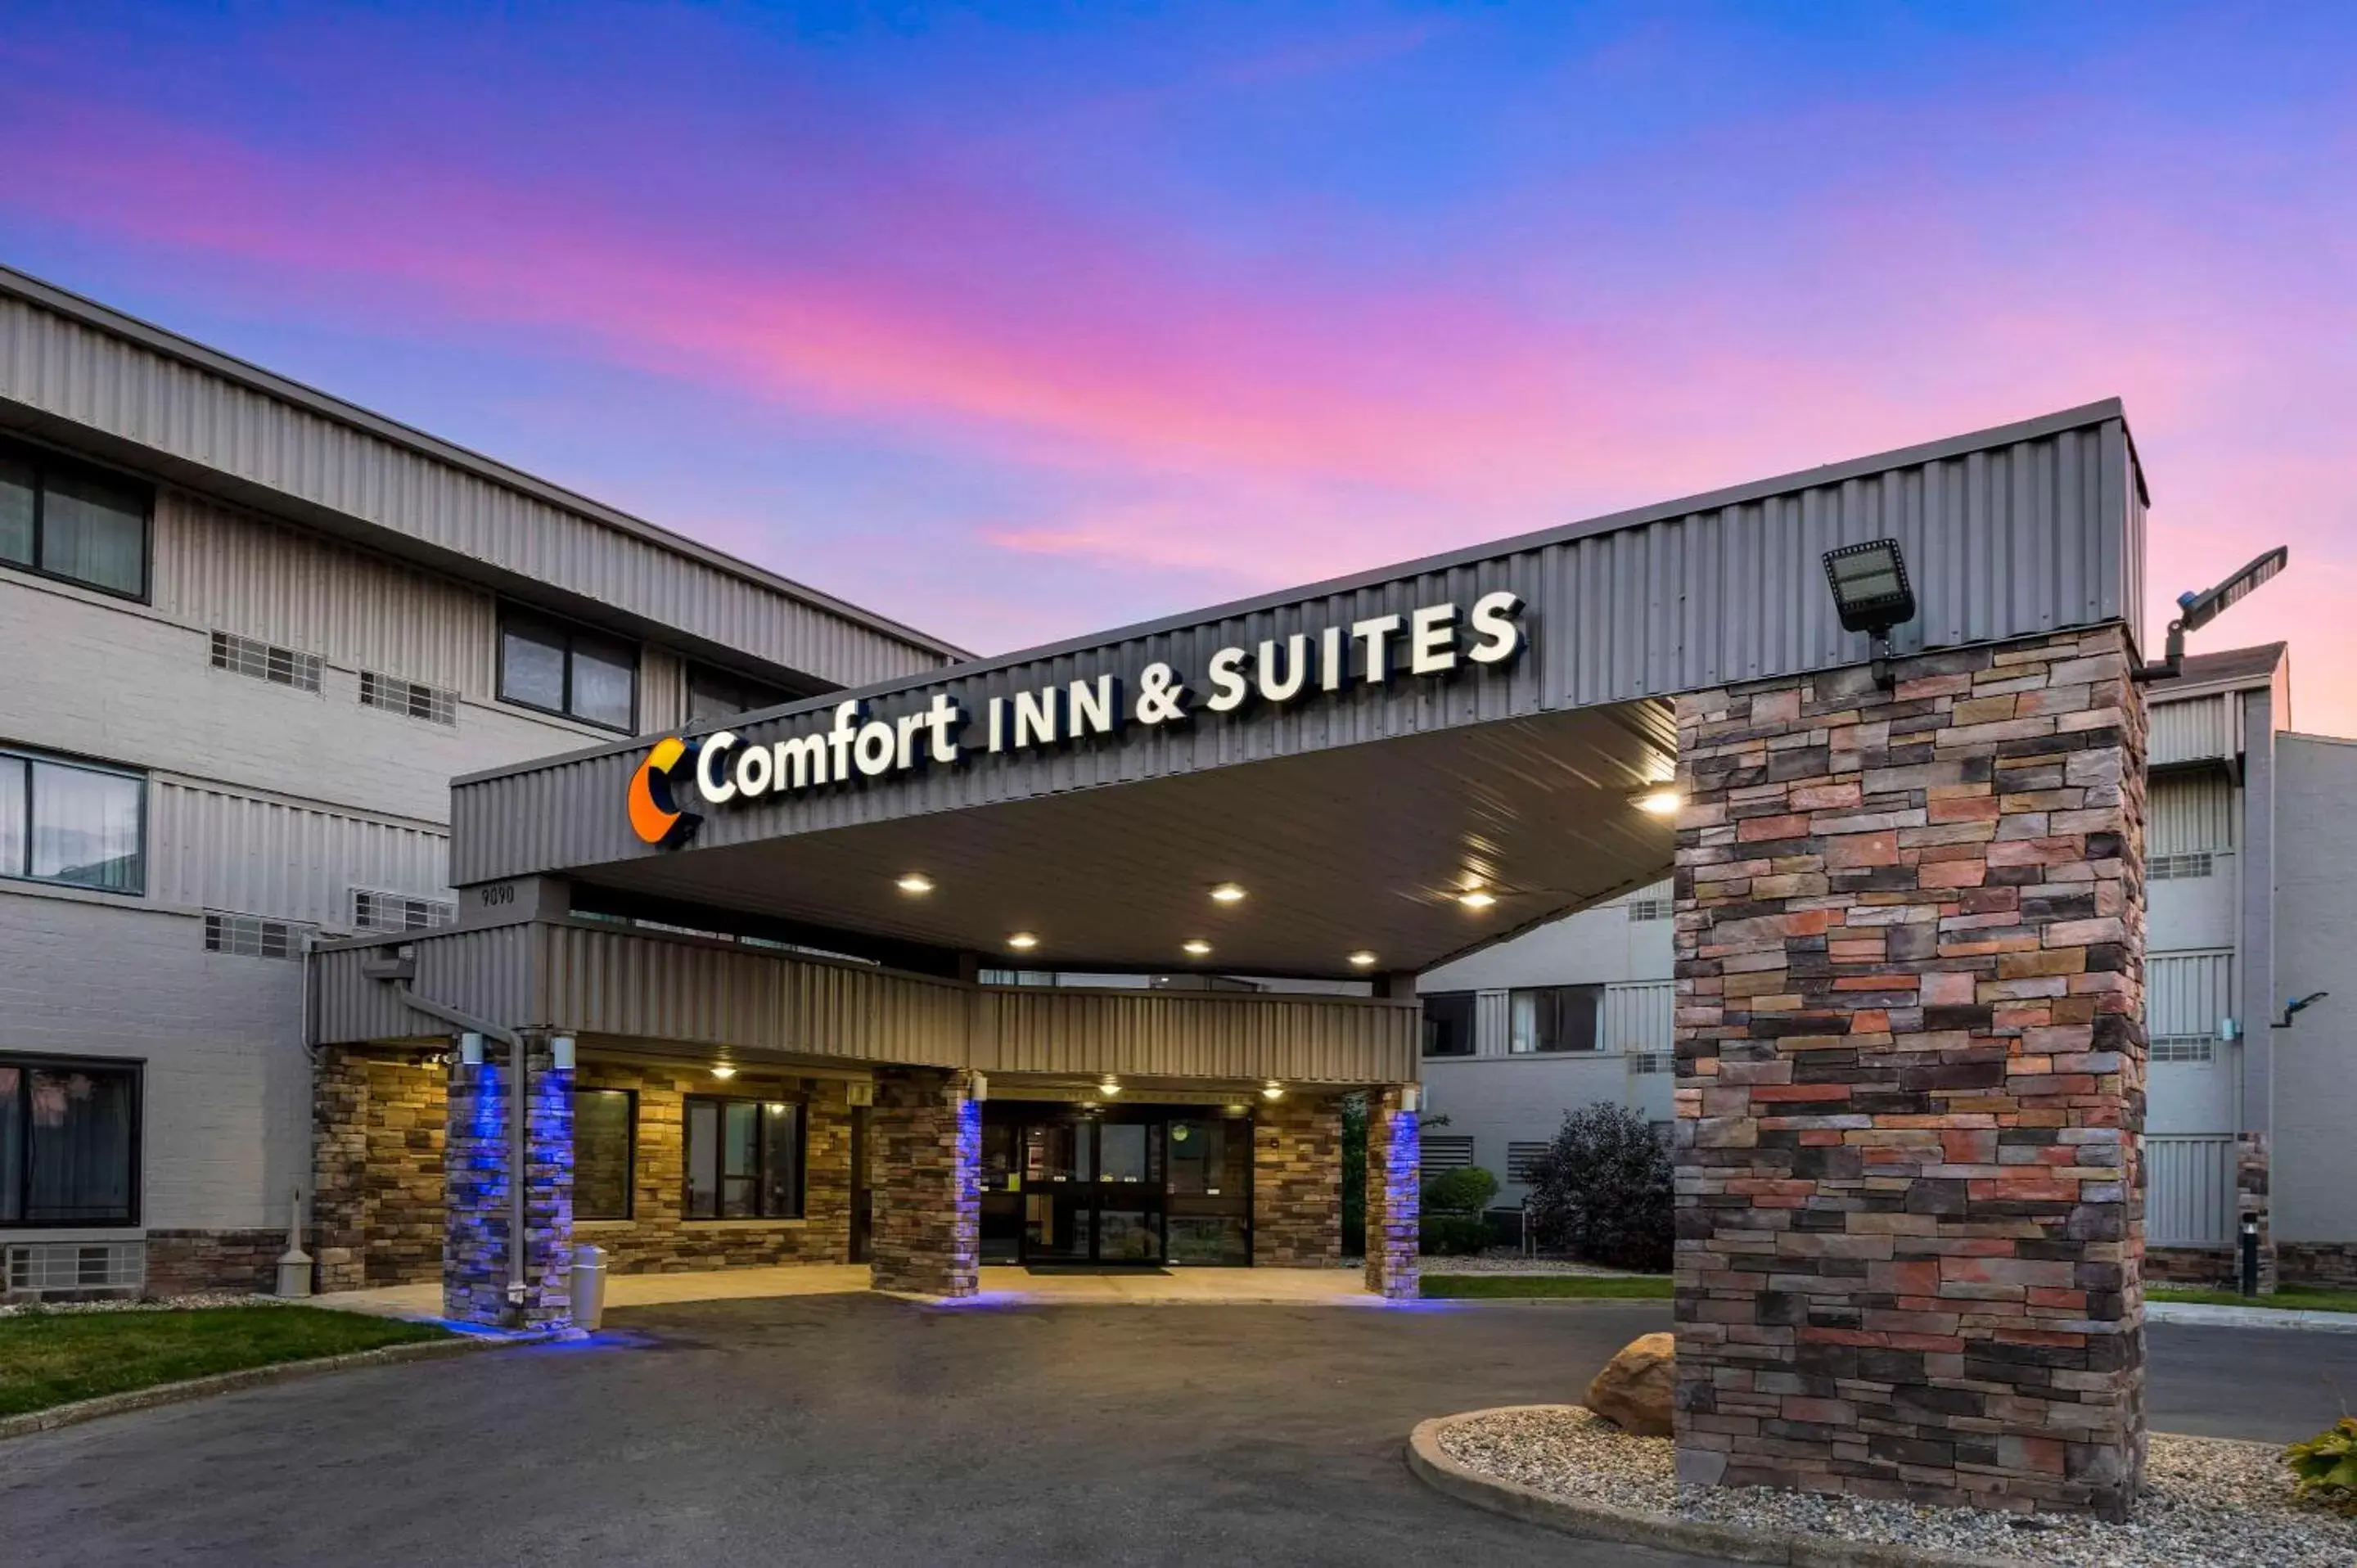 Property building in Comfort Inn & Suites North at the Pyramids